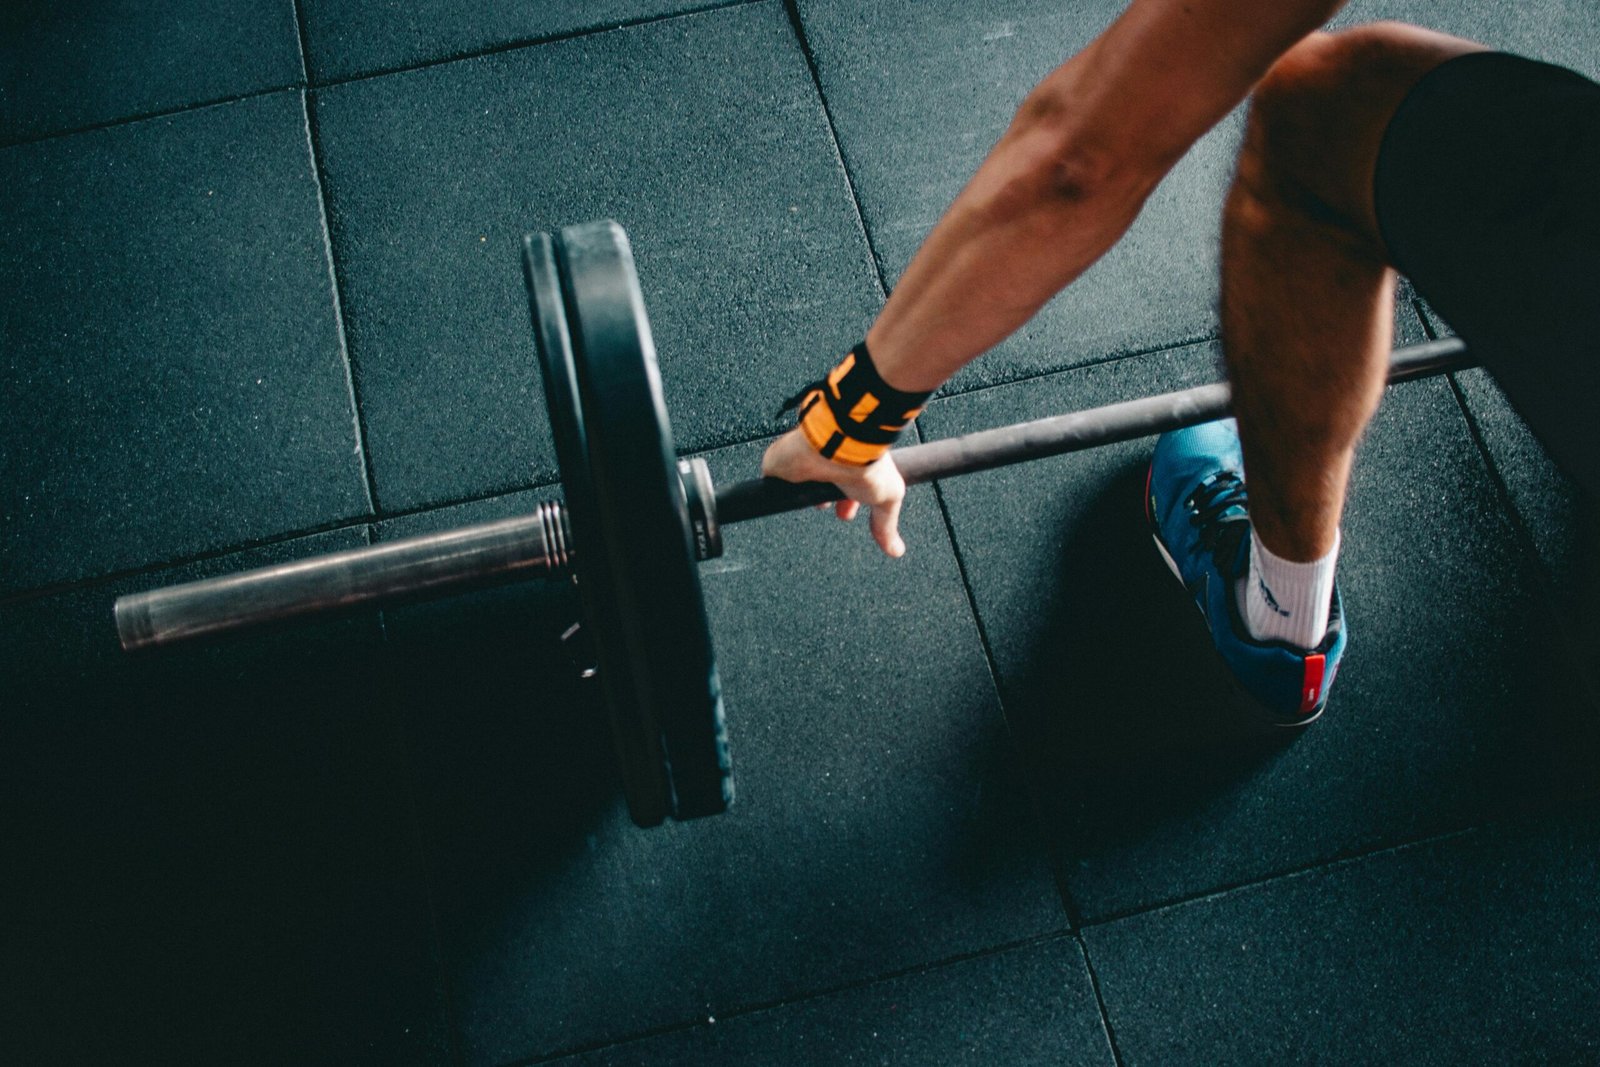 Get the Most out of Your Local Gym with Effective Workout Routines